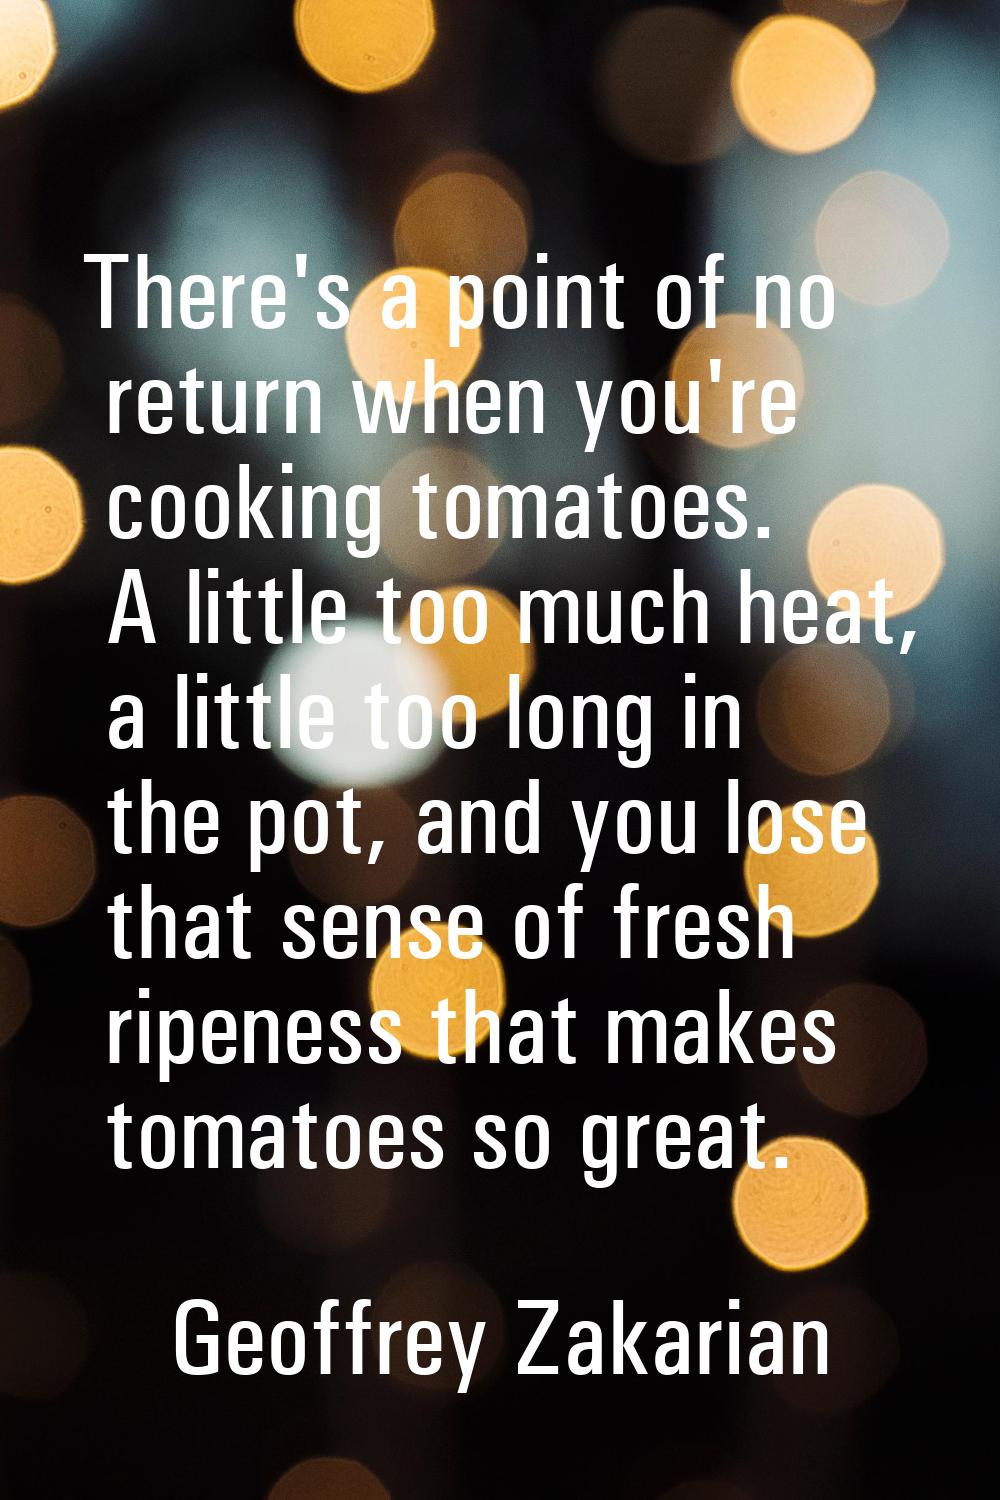 There's a point of no return when you're cooking tomatoes. A little too much heat, a little too lon